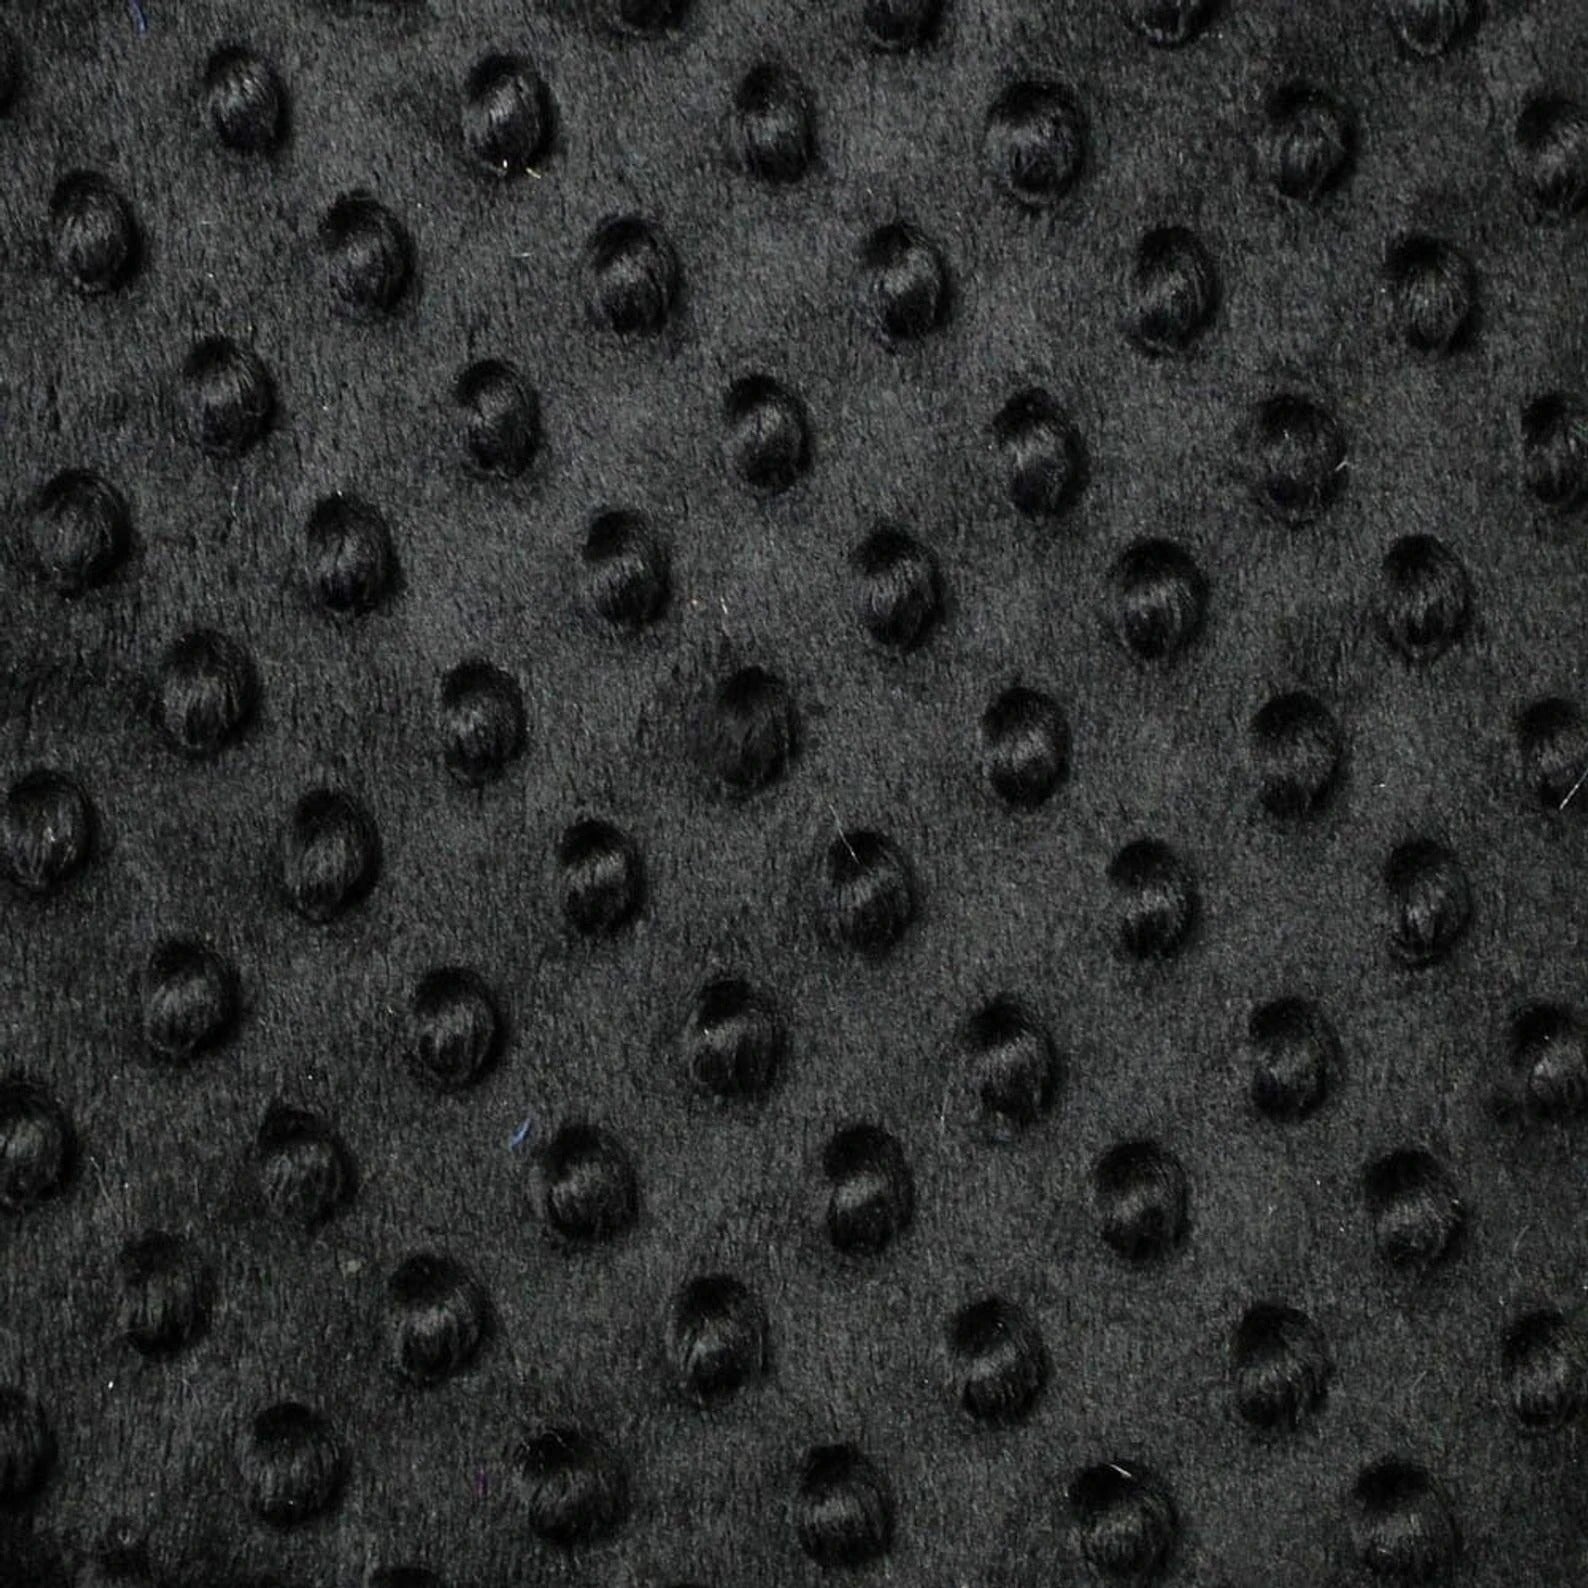 Dimple Dot Minky Fabric Sold By The Yard - 36"/ 58"MinkyICEFABRICICE FABRICSBlackBy The Yard (60 inches Wide)Dimple Dot Minky Fabric Sold By The Yard - 36"/ 58" ICEFABRIC Black